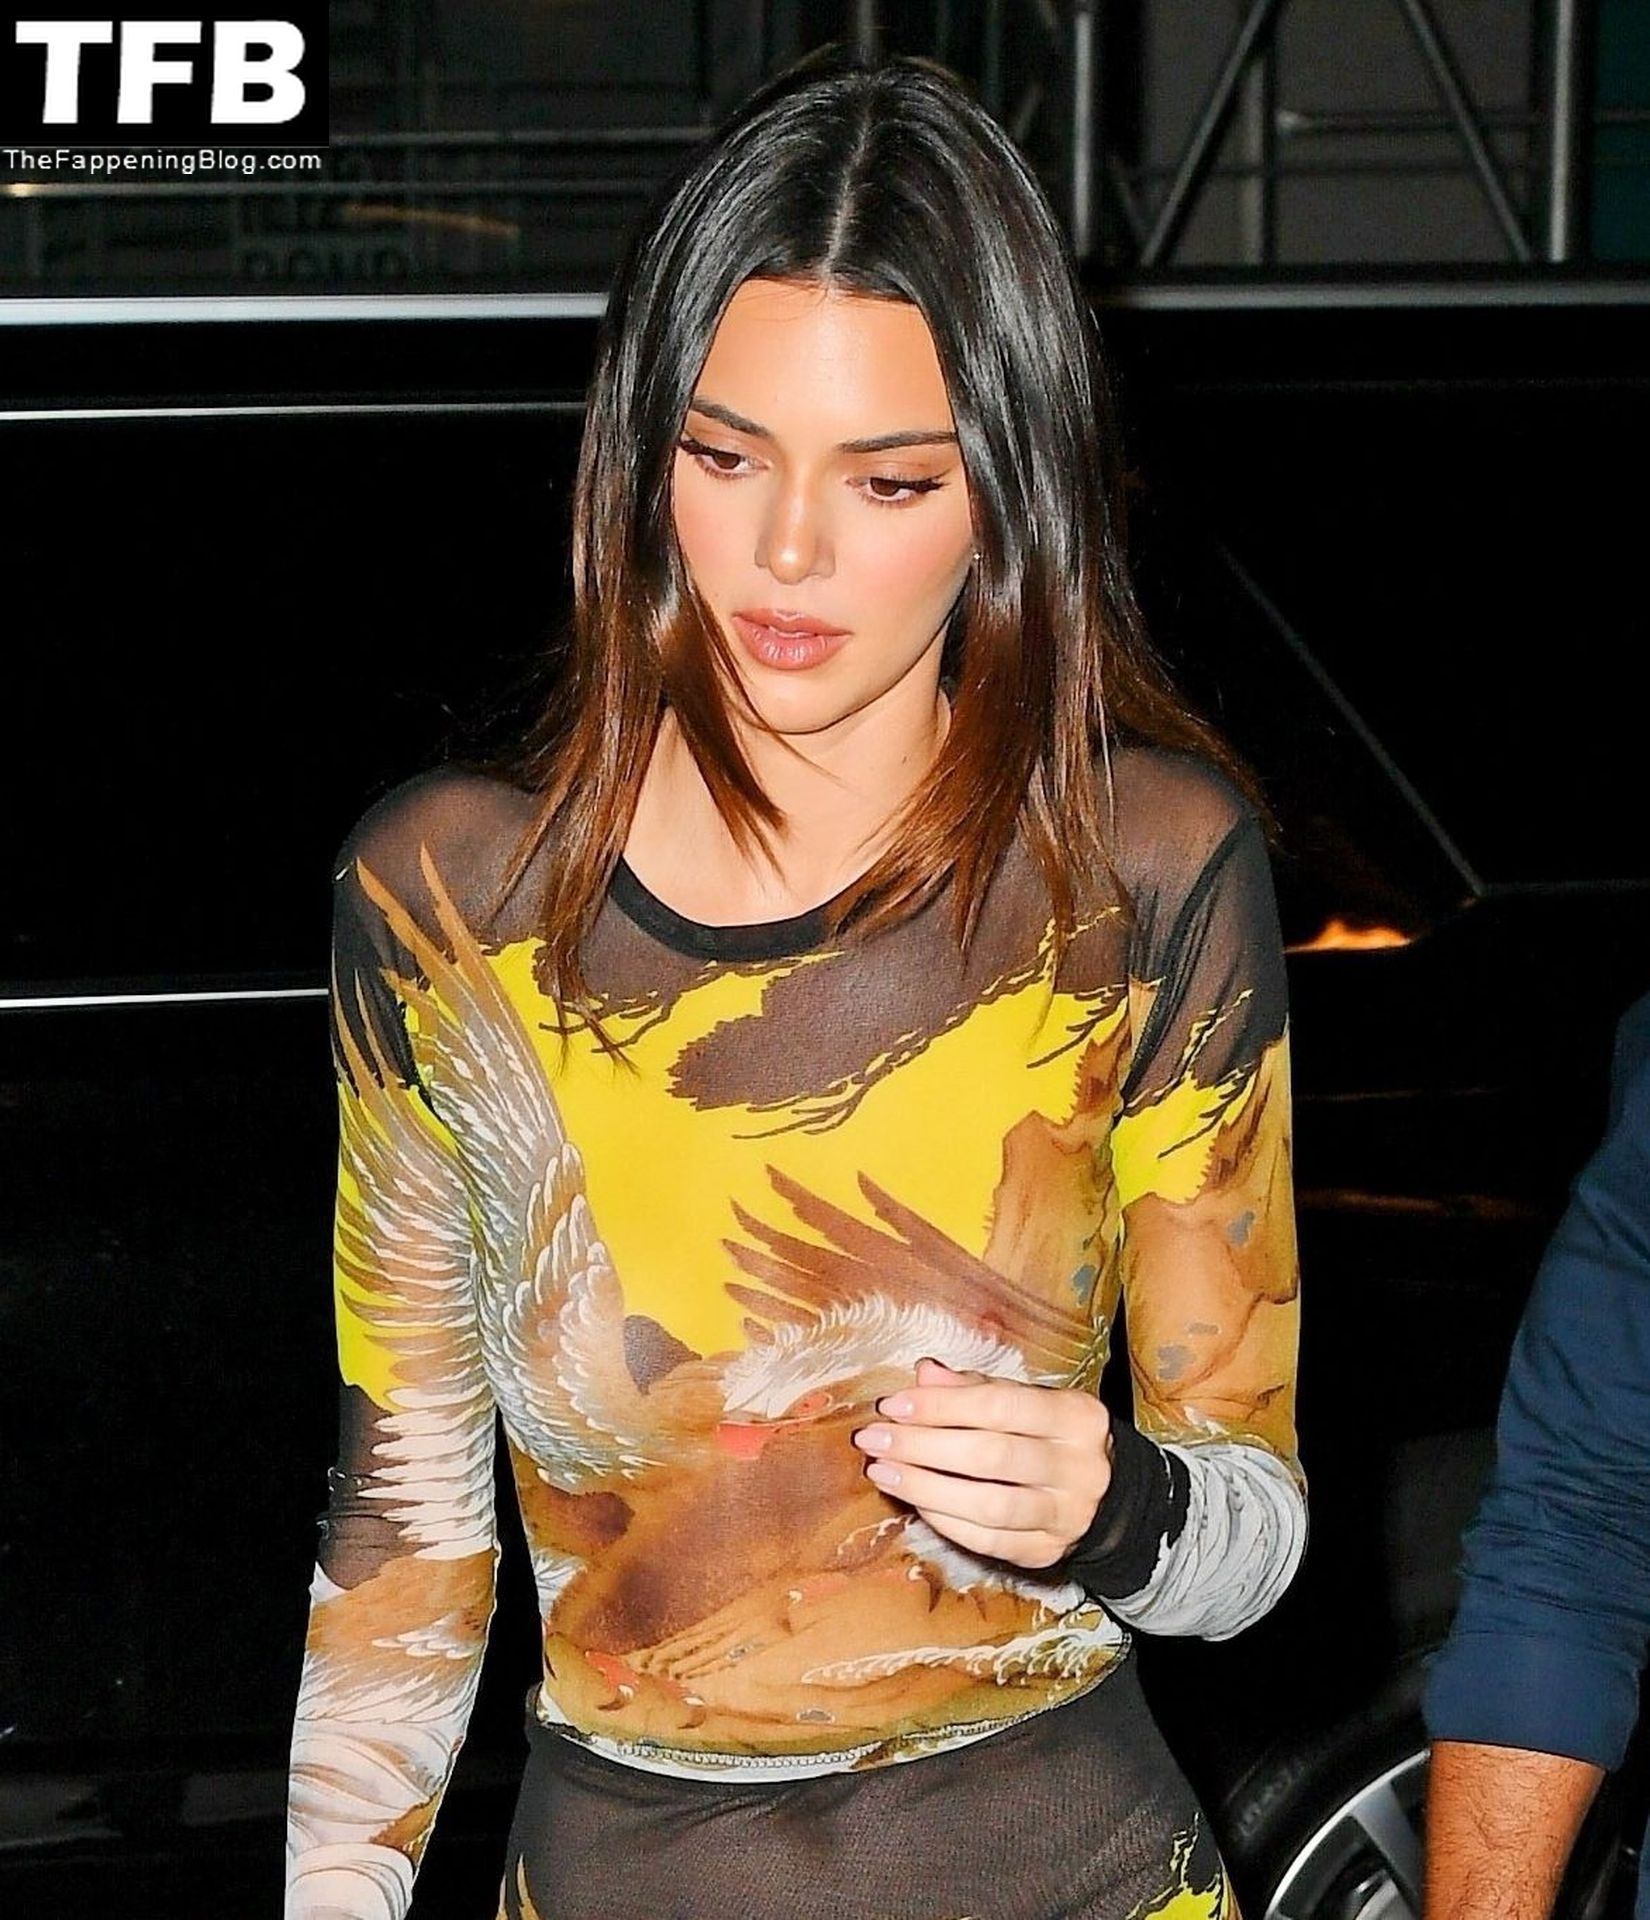 Kendall-Jenner-See-Through-Nudity-The-Fappening-Blog-35.jpg